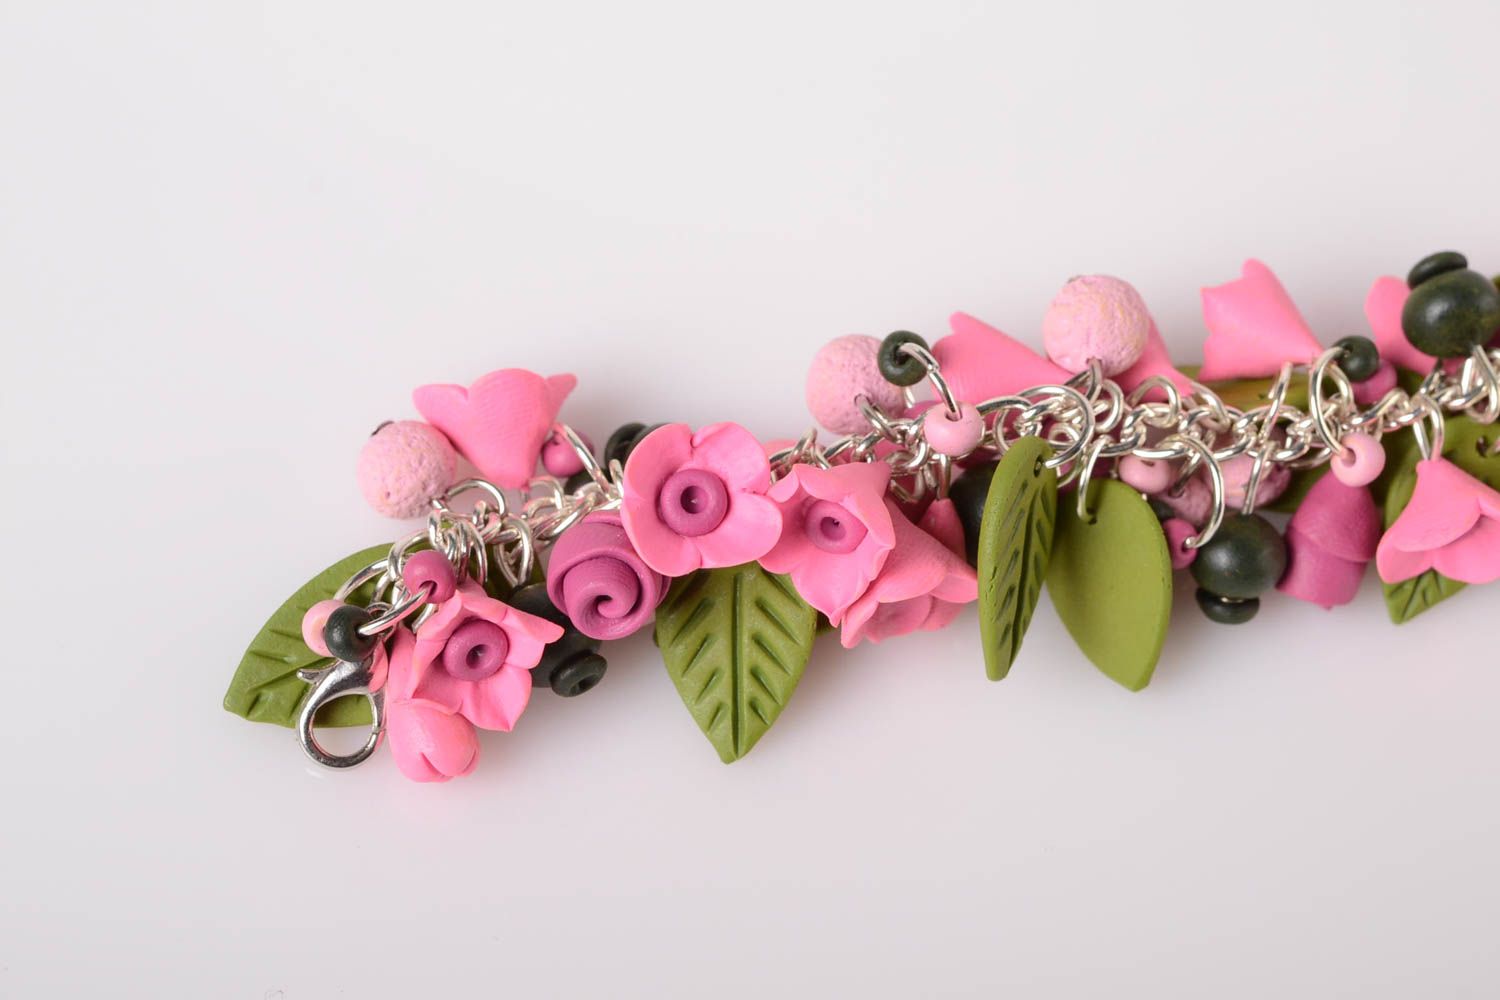 Handmade floral bracelet polymer clay floral jewelry gifts for girls cool gifts photo 4